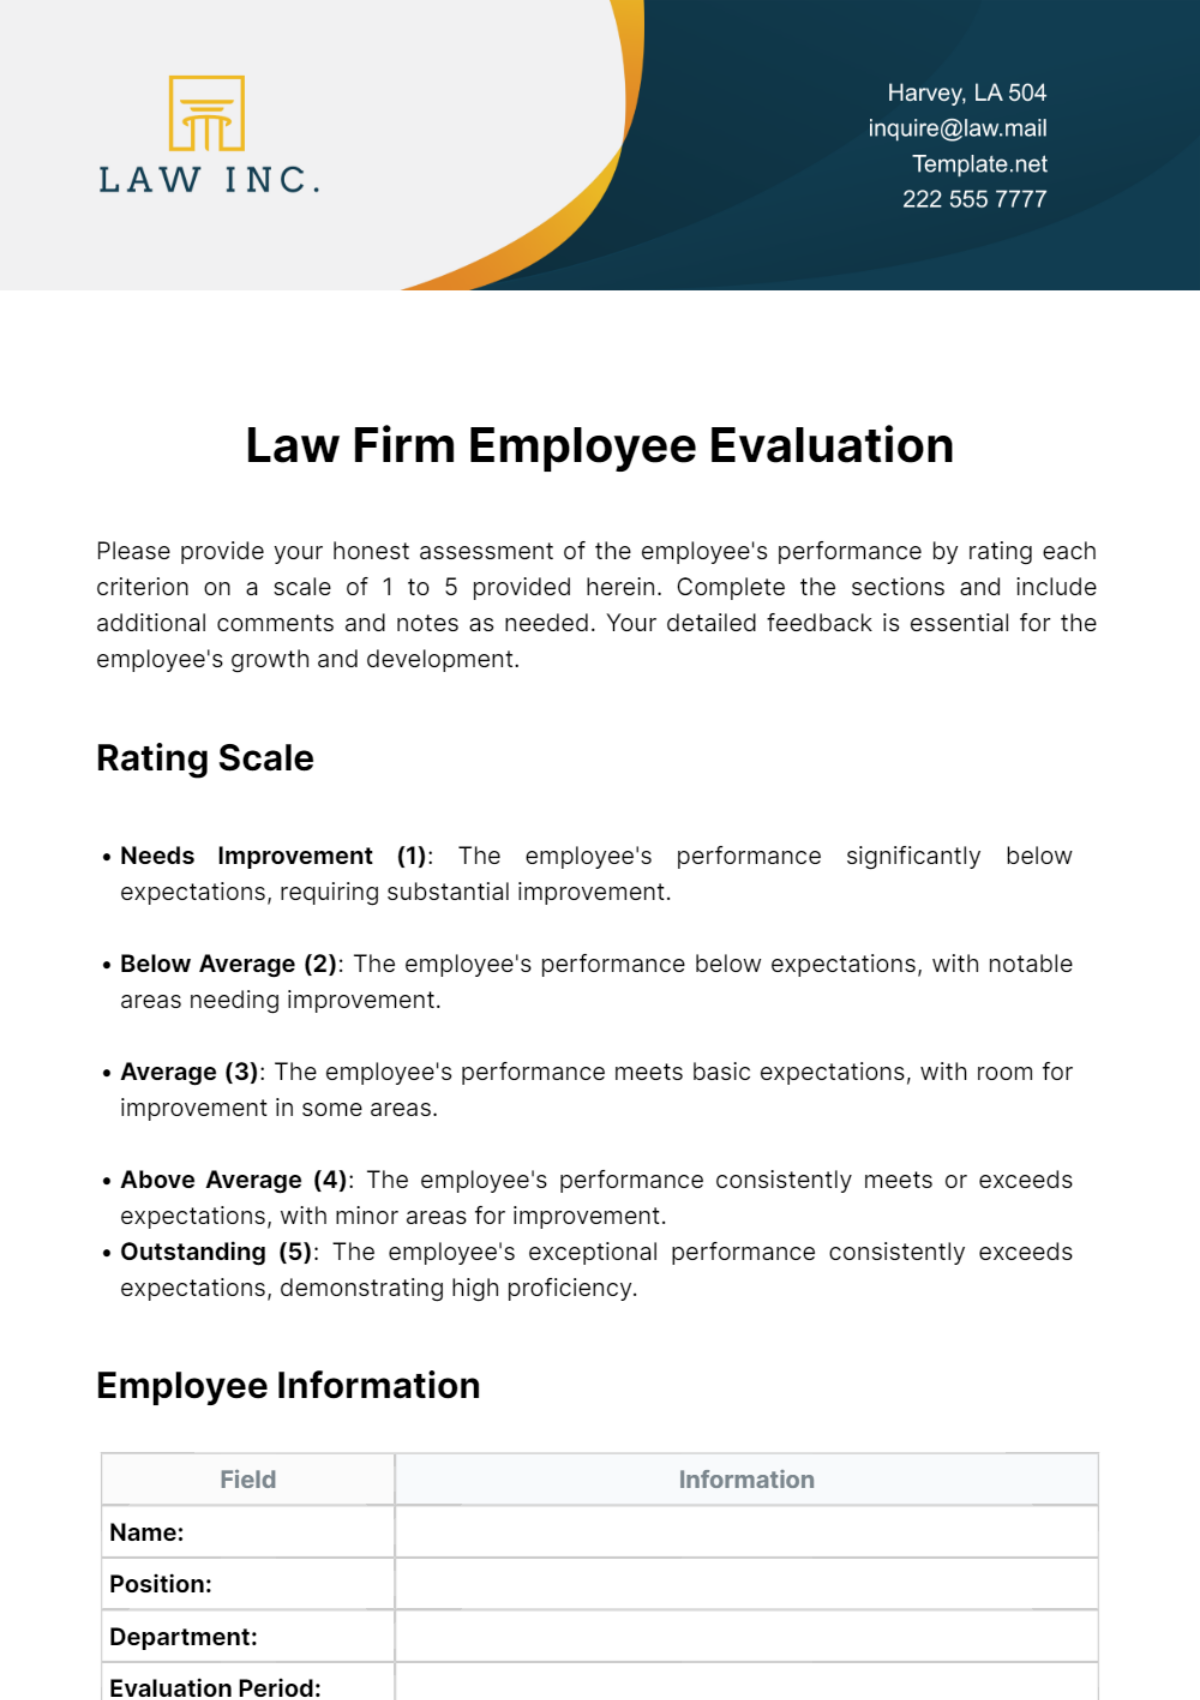 Law Firm Employee Evaluation Template